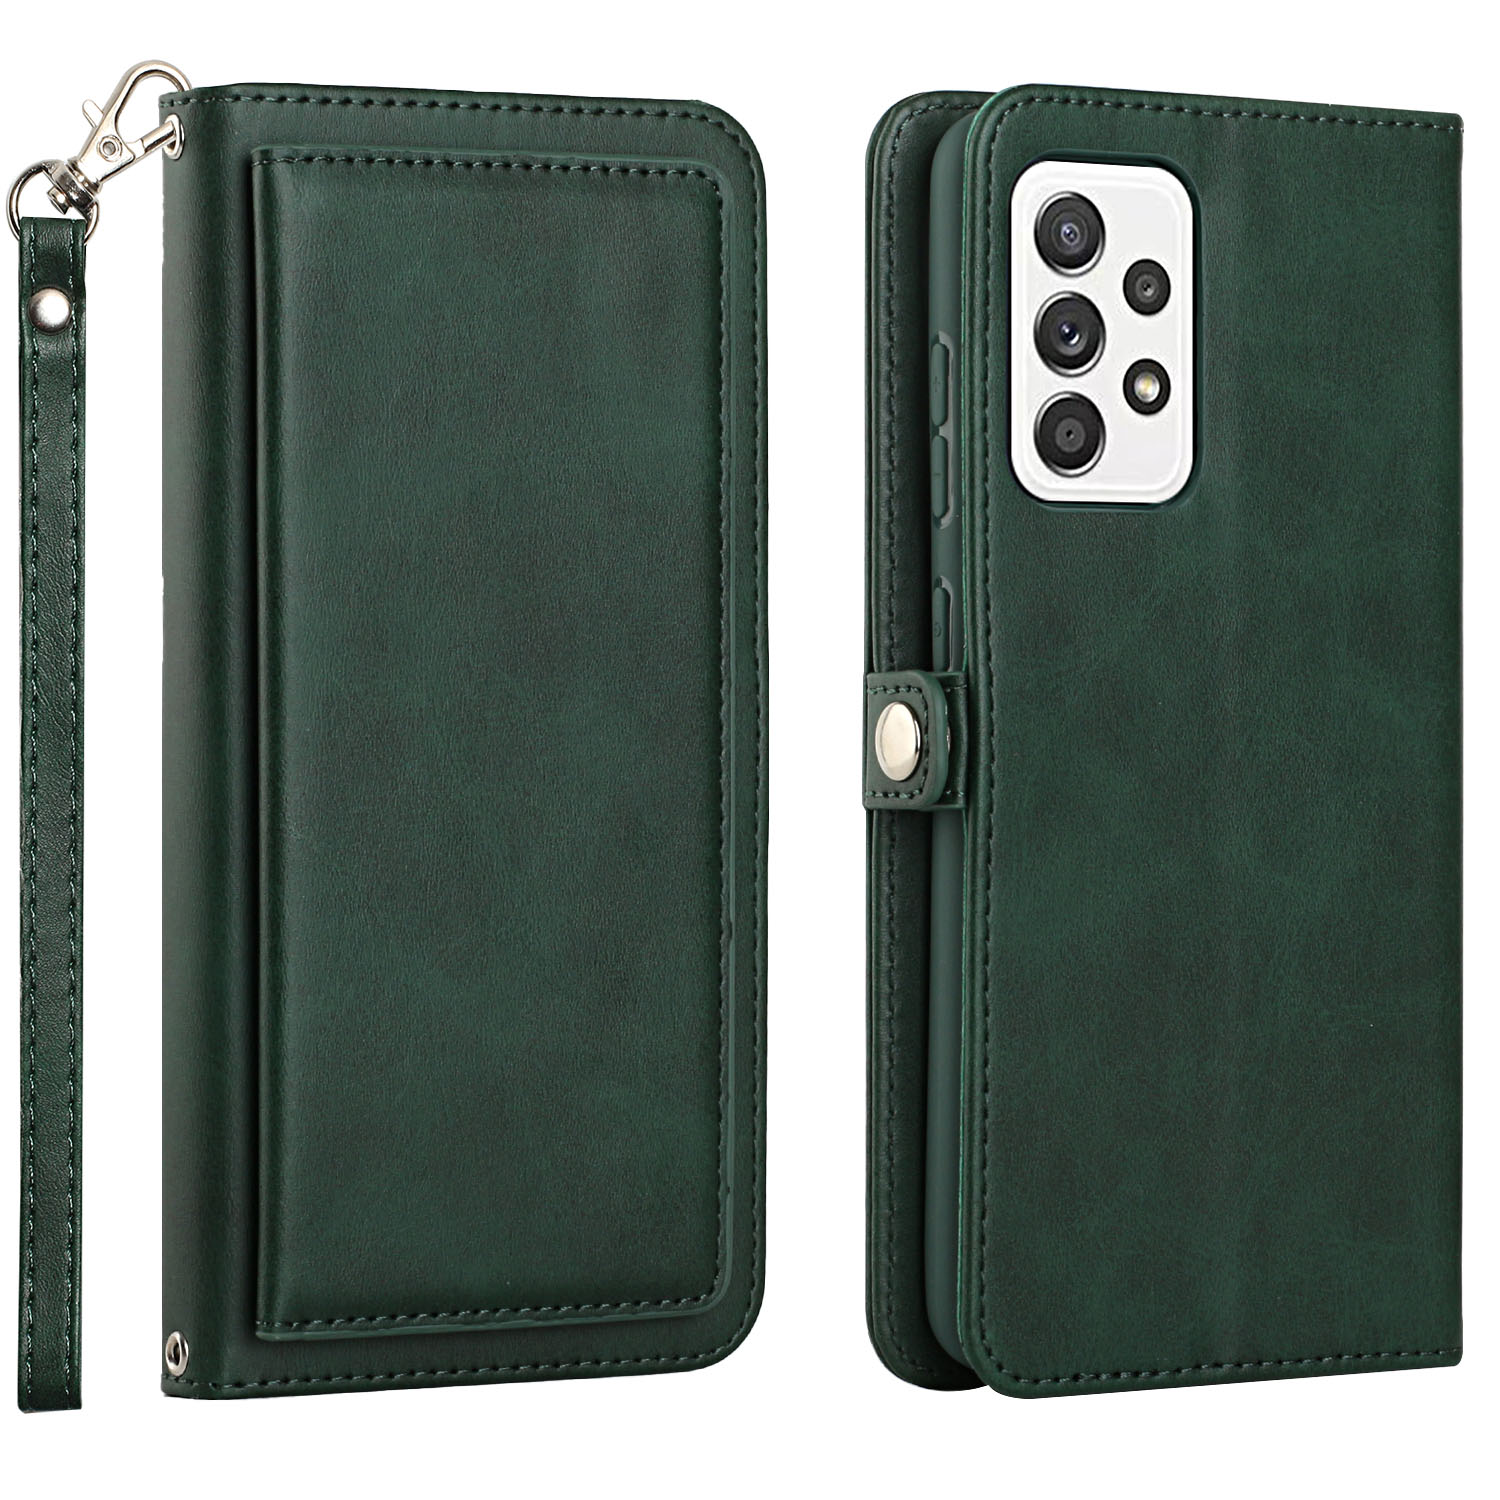 Premium PU Leather Folio WALLET Front Cover Case for Galaxy A52 5G (Green)